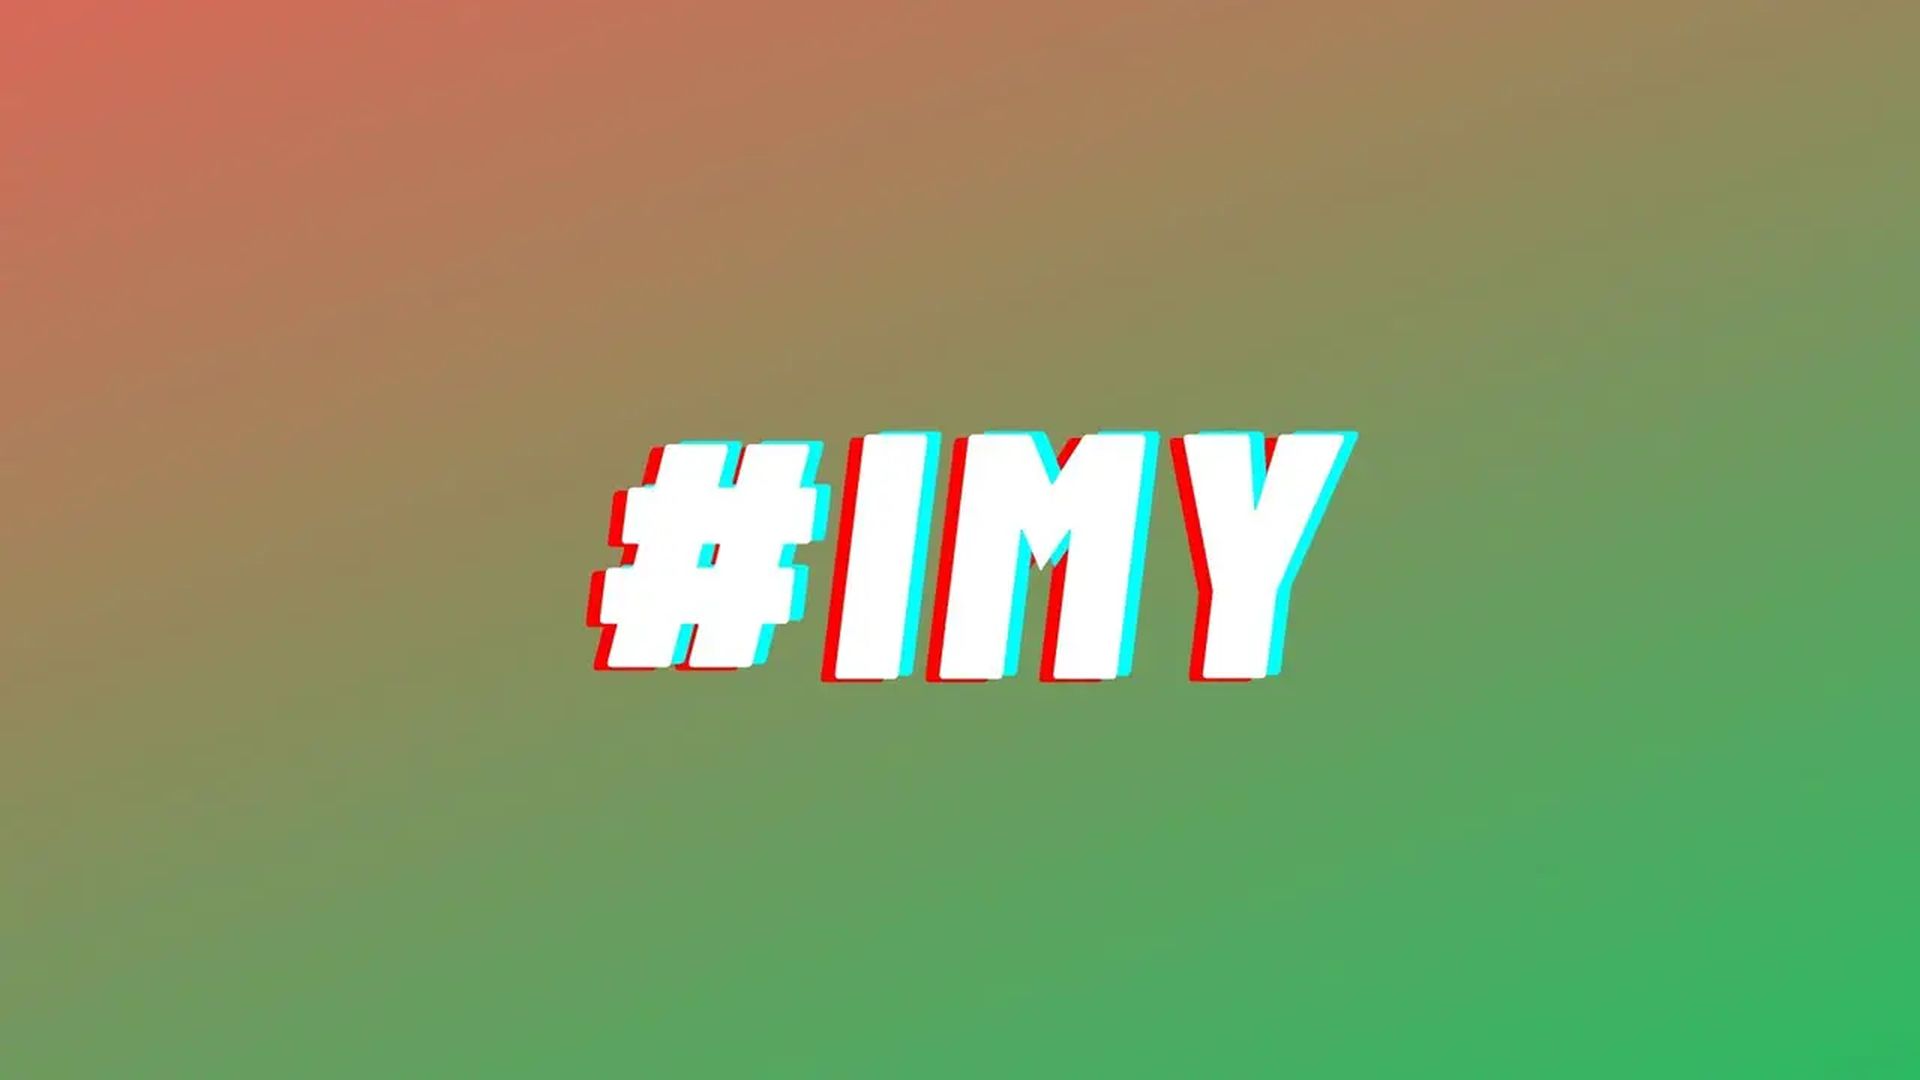 What does IMY mean?